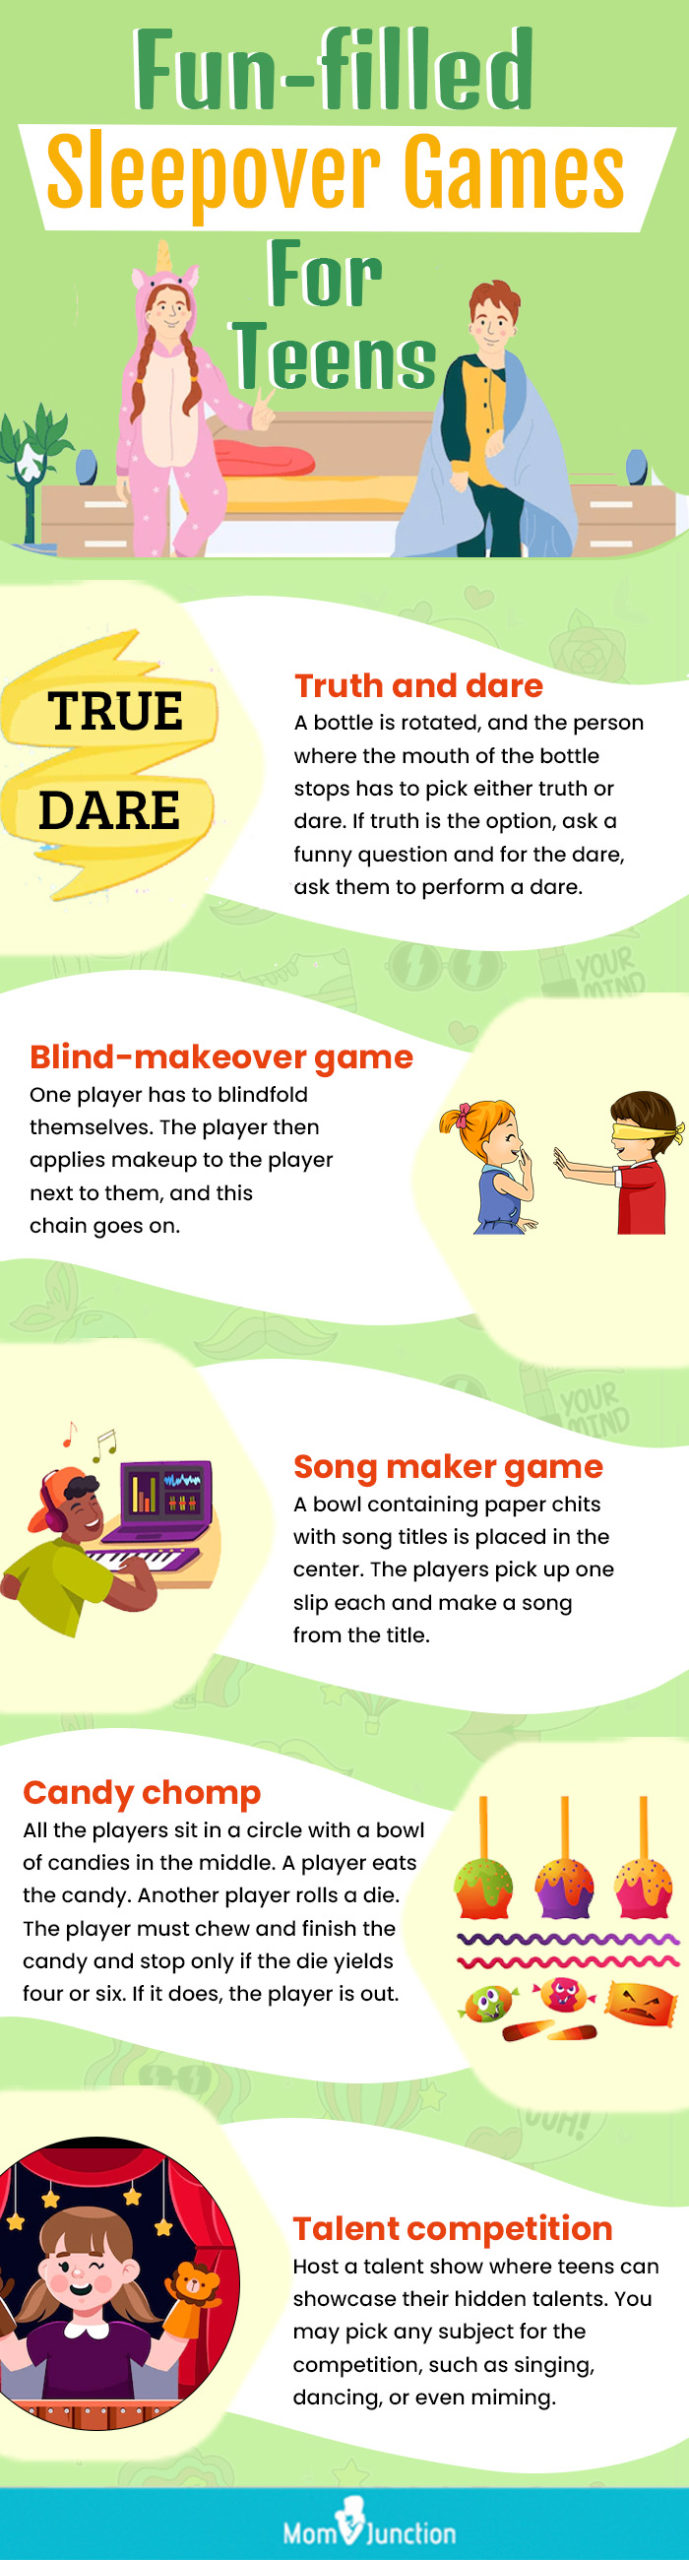 fun filled sleepover games for teens [infographic]